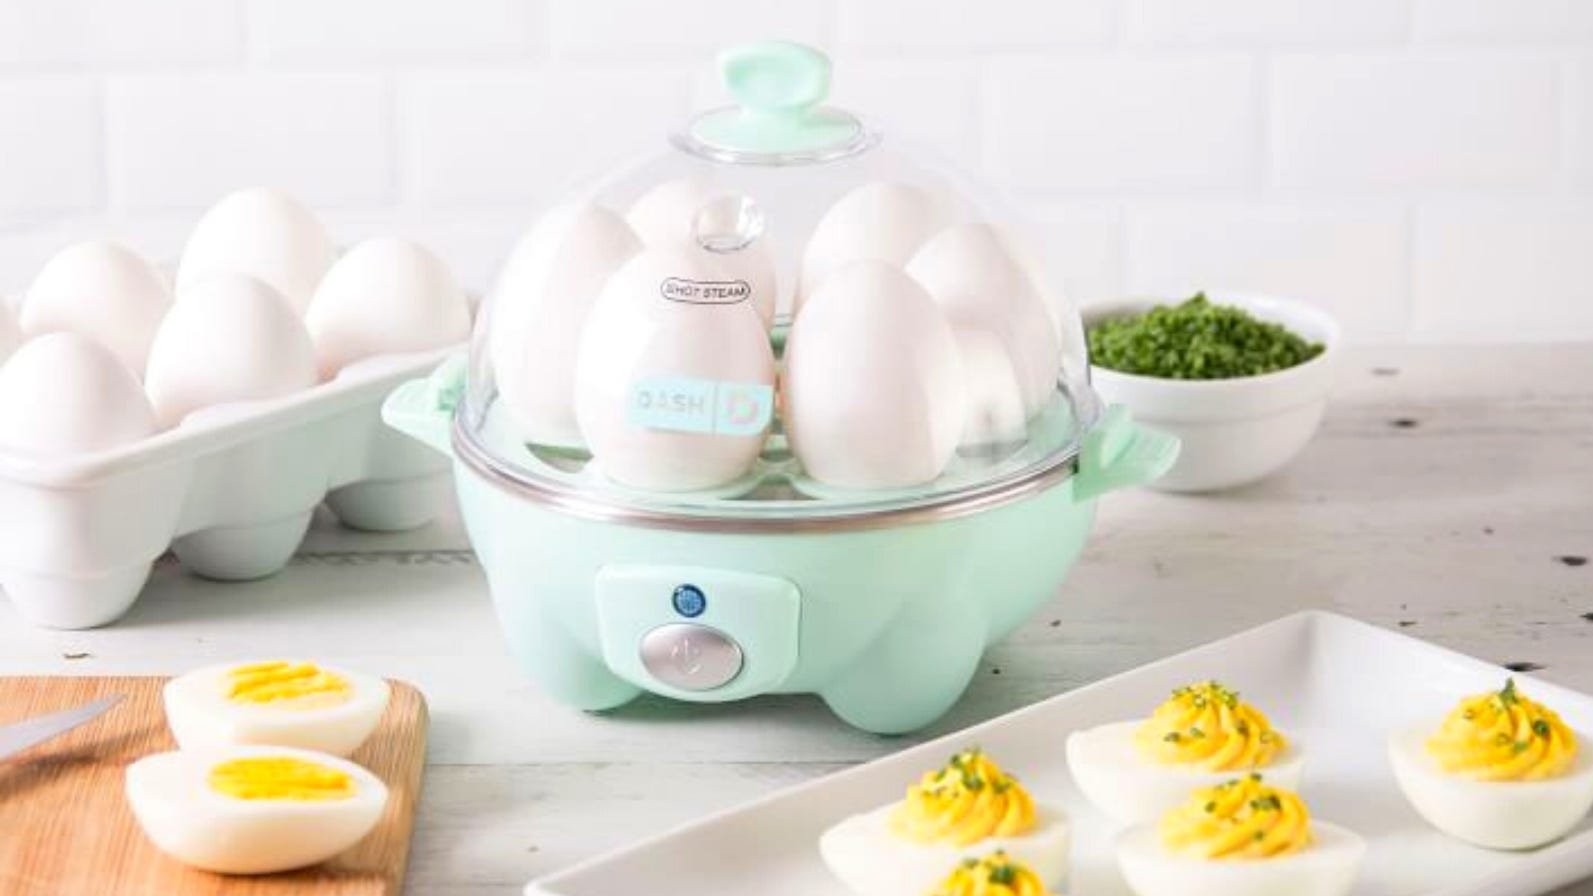 The Dash egg cooker can change your morning routine—and it's less than $20 for Prime Day